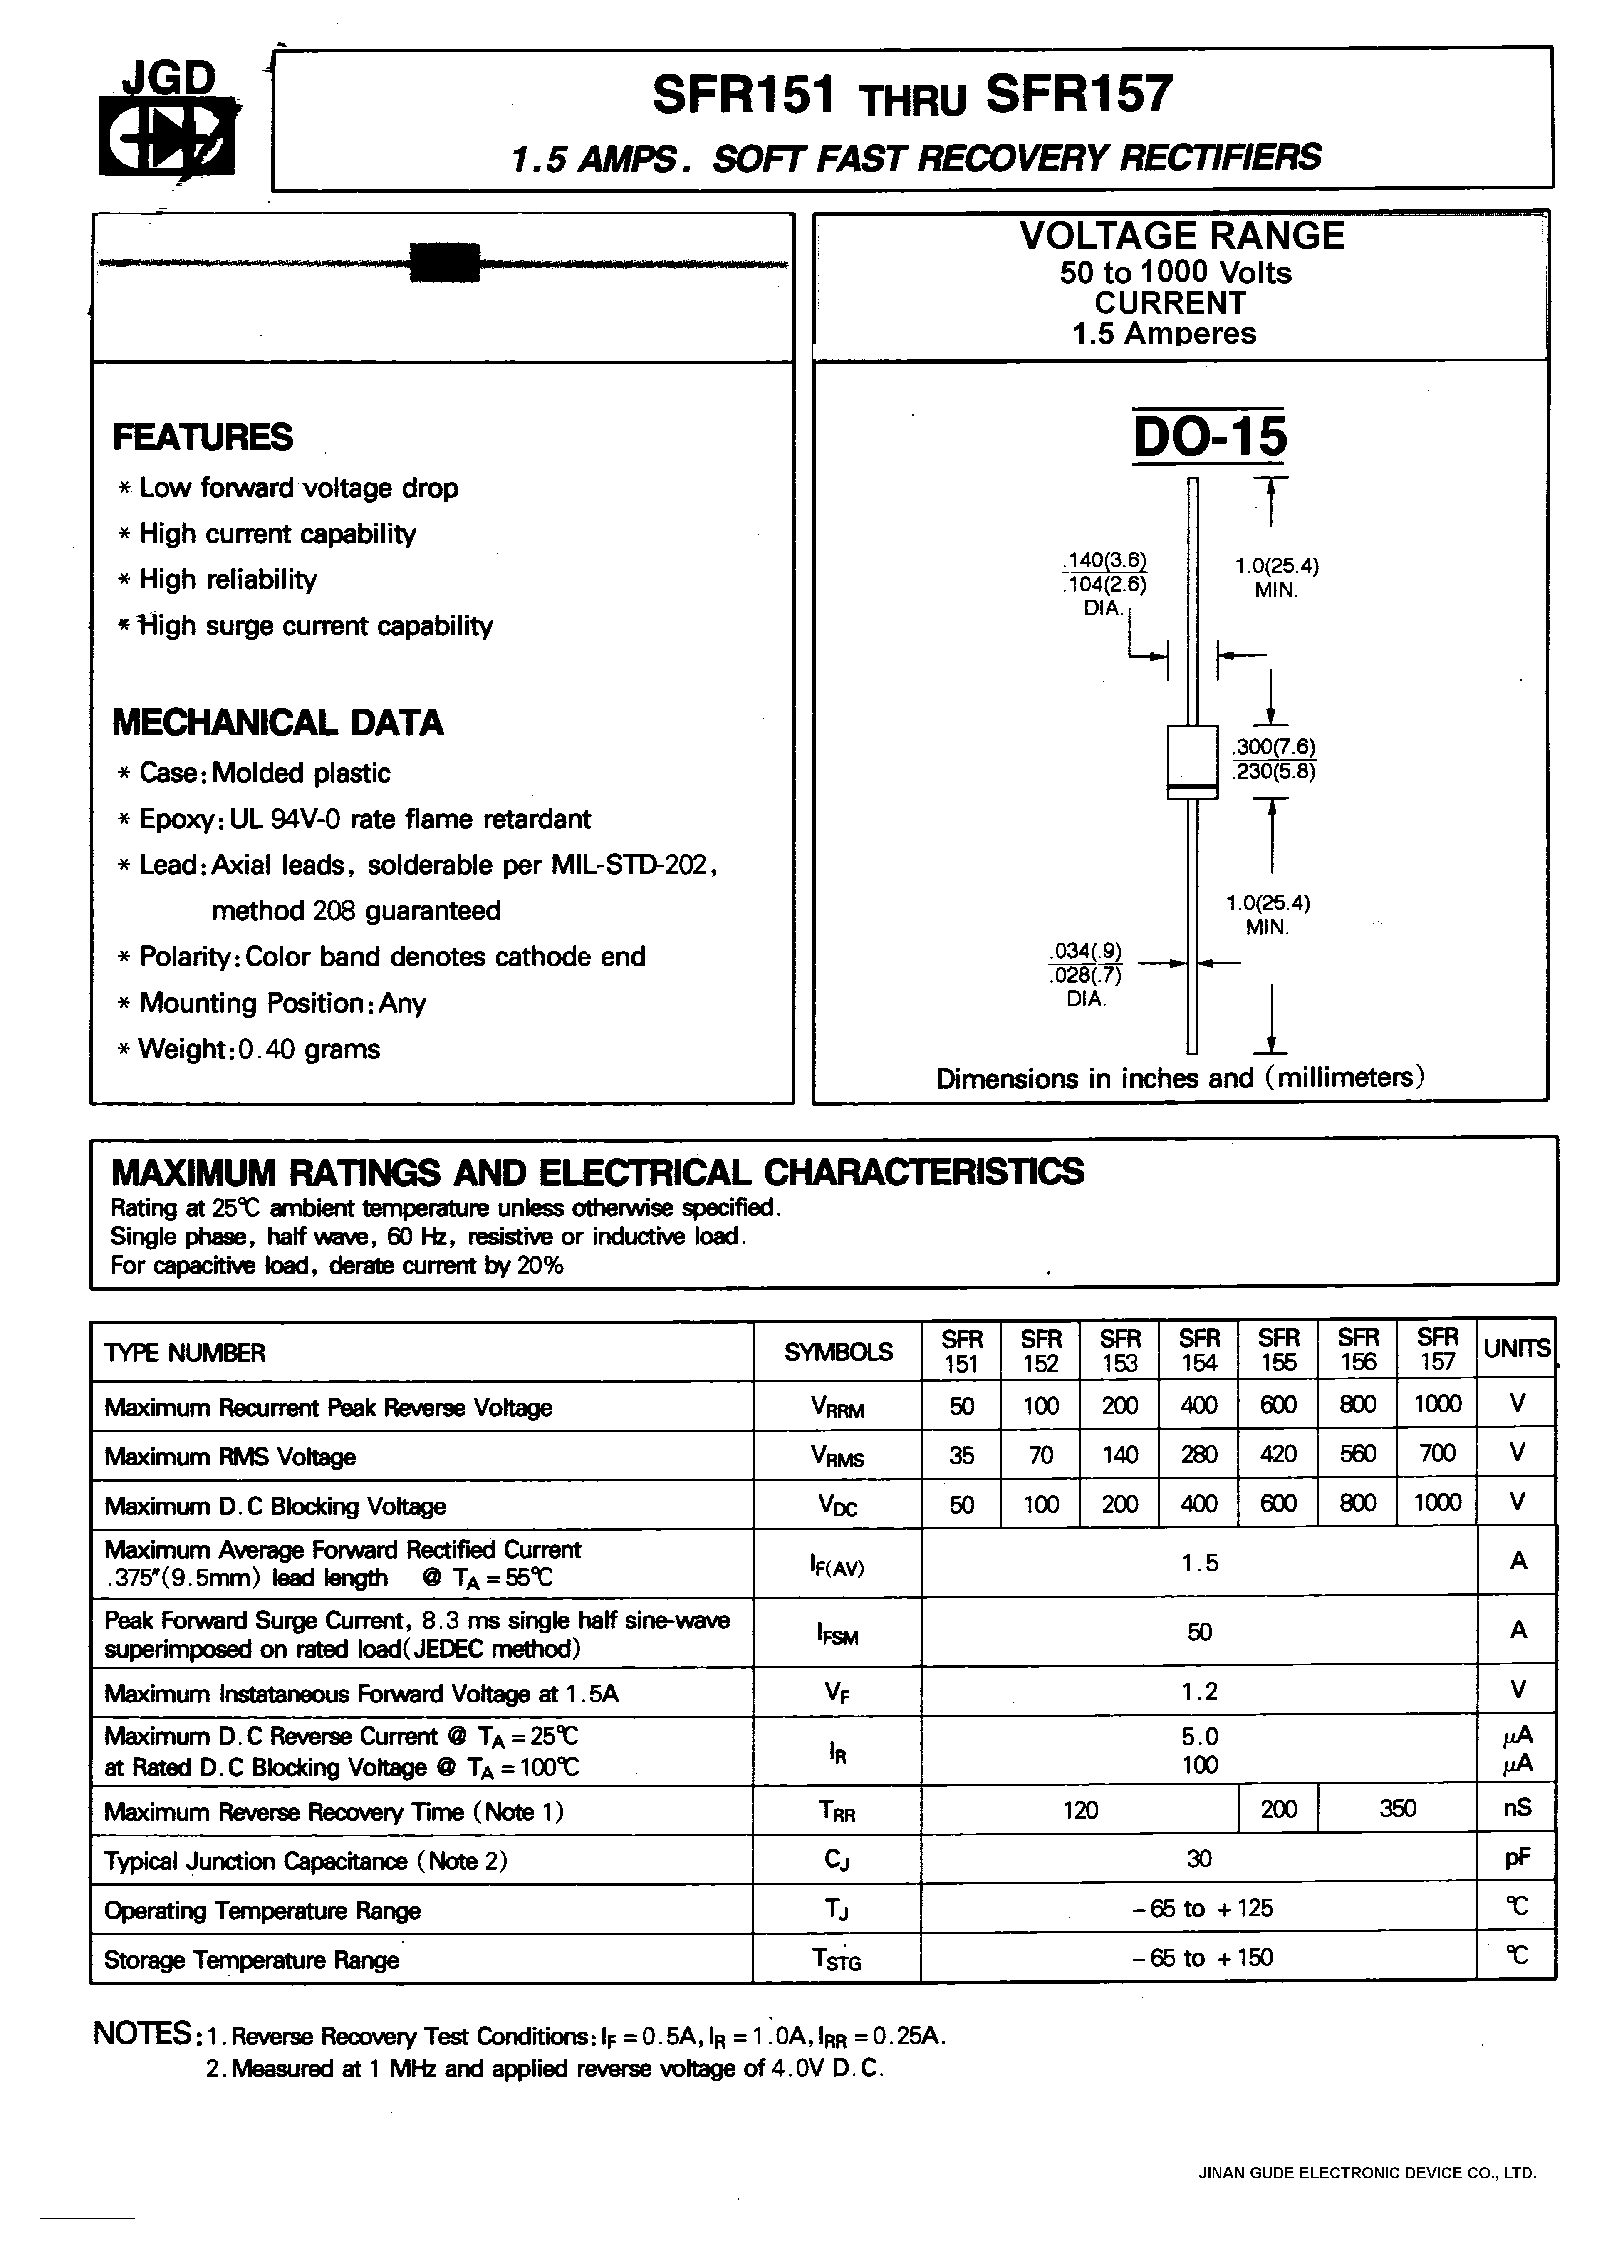 Datasheet SFR151 - 1.5 AMPS. SOFT FAST RECOVERY RECTIFIERS page 1